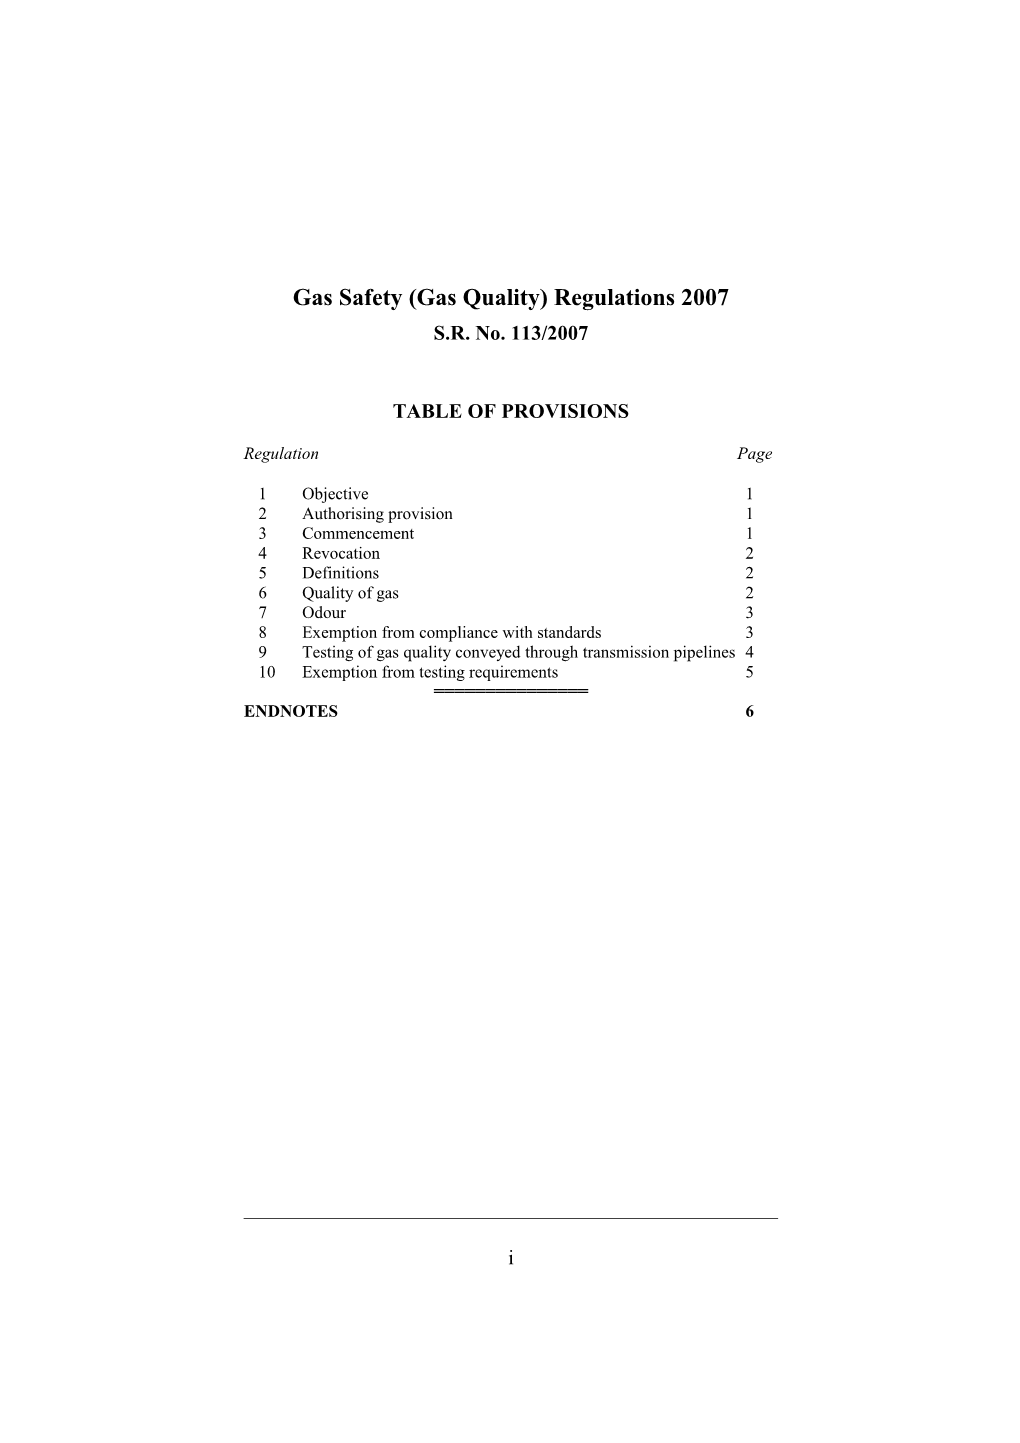 Gas Safety (Gas Quality) Regulations 2007